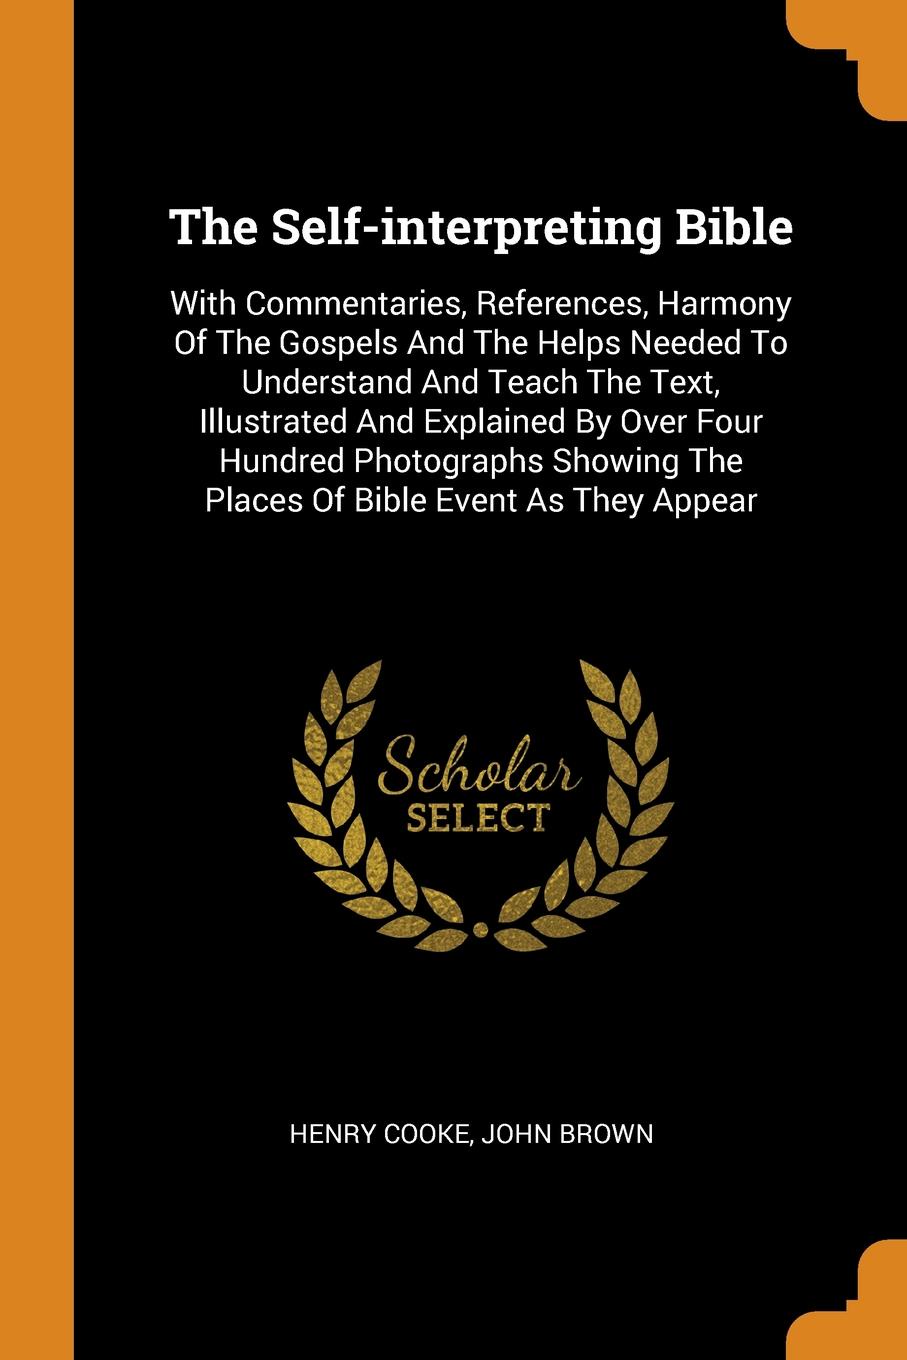 The Self-interpreting Bible. With Commentaries, References, Harmony Of The Gospels And The Helps Needed To Understand And Teach The Text, Illustrated And Explained By Over Four Hundred Photographs Showing The Places Of Bible Event As They Appear